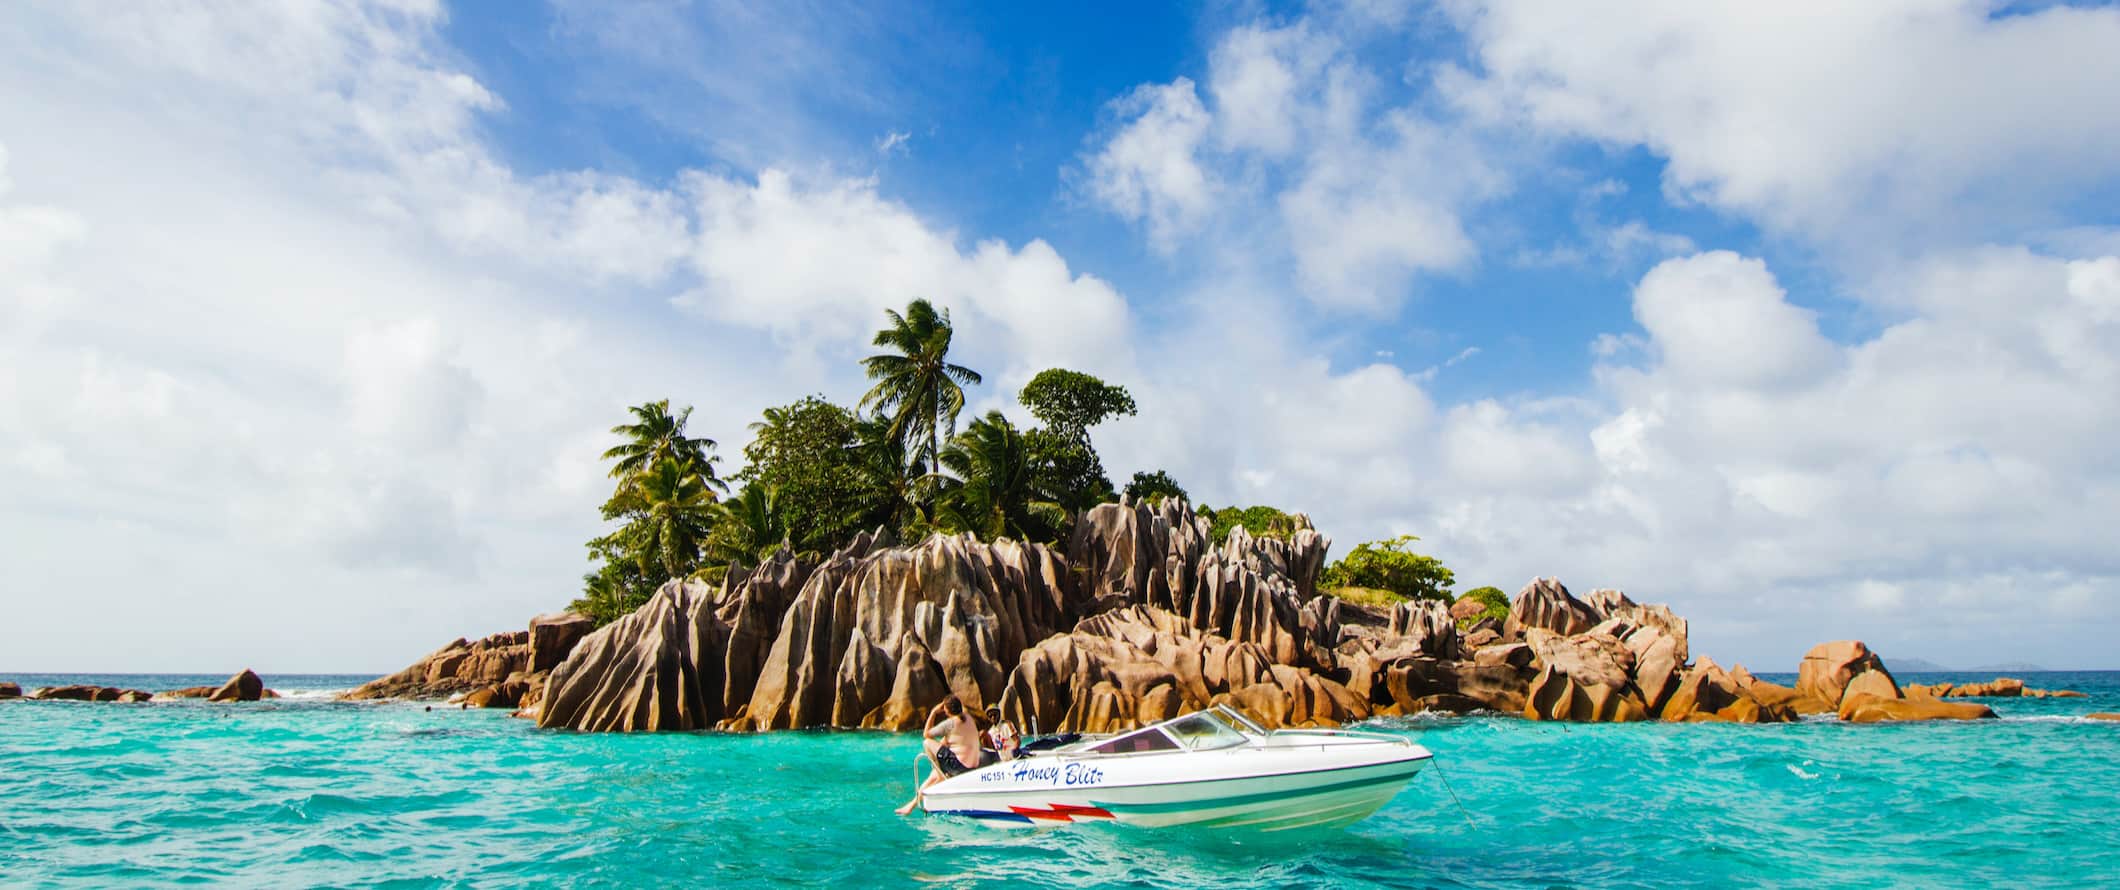 A boat anchored near a small island in the Seychelles during a beautiful sunny day